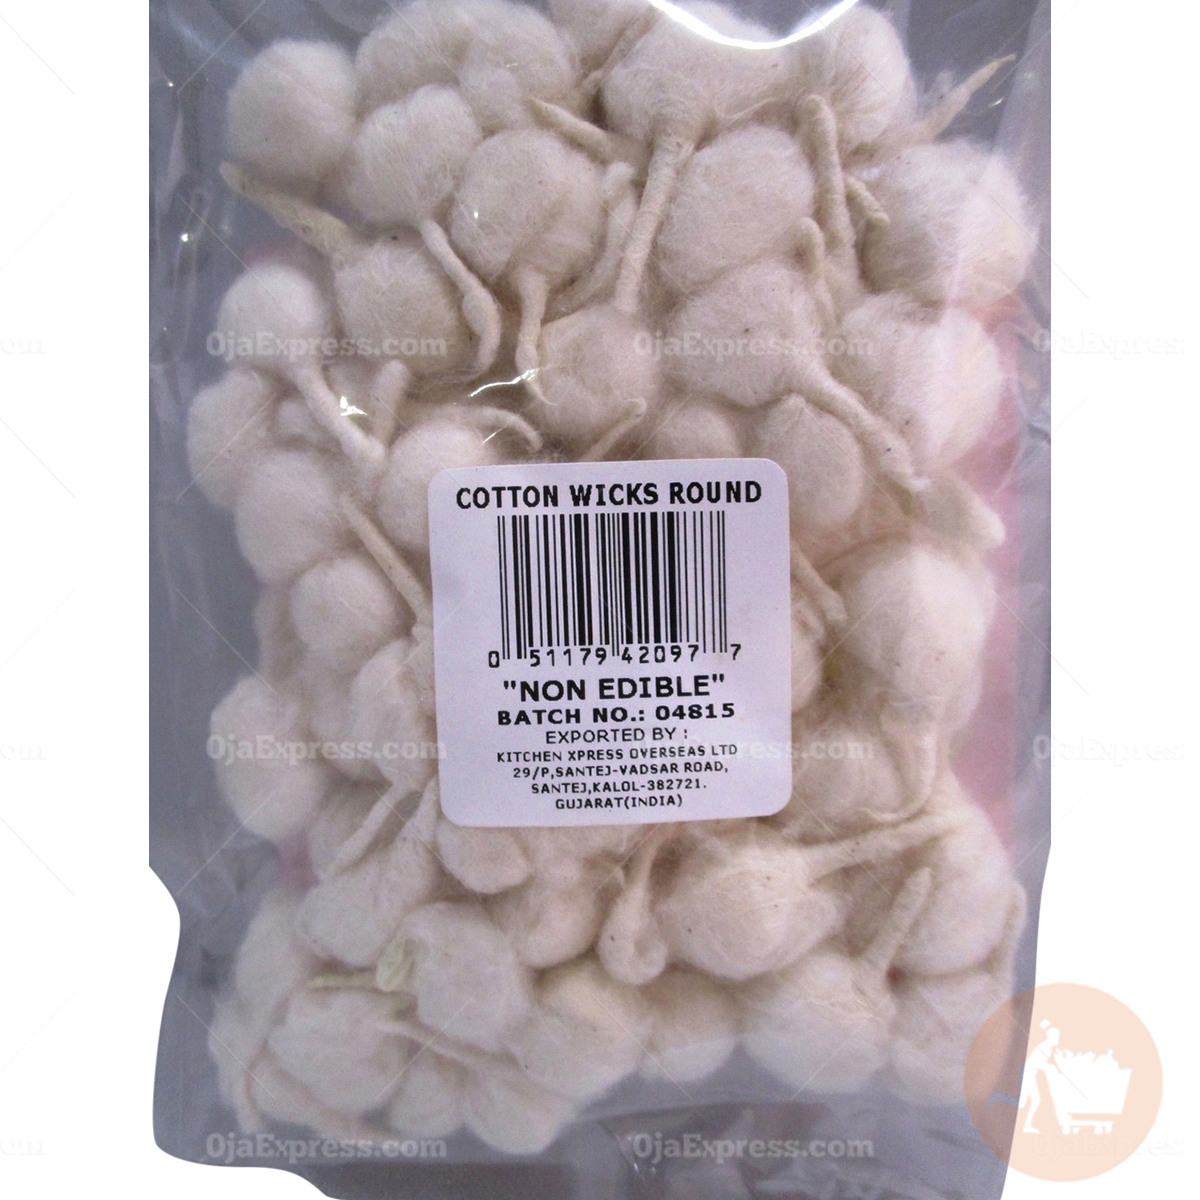 Cotton Wicks Round - OjaExpress - Cultural Grocery Delivery